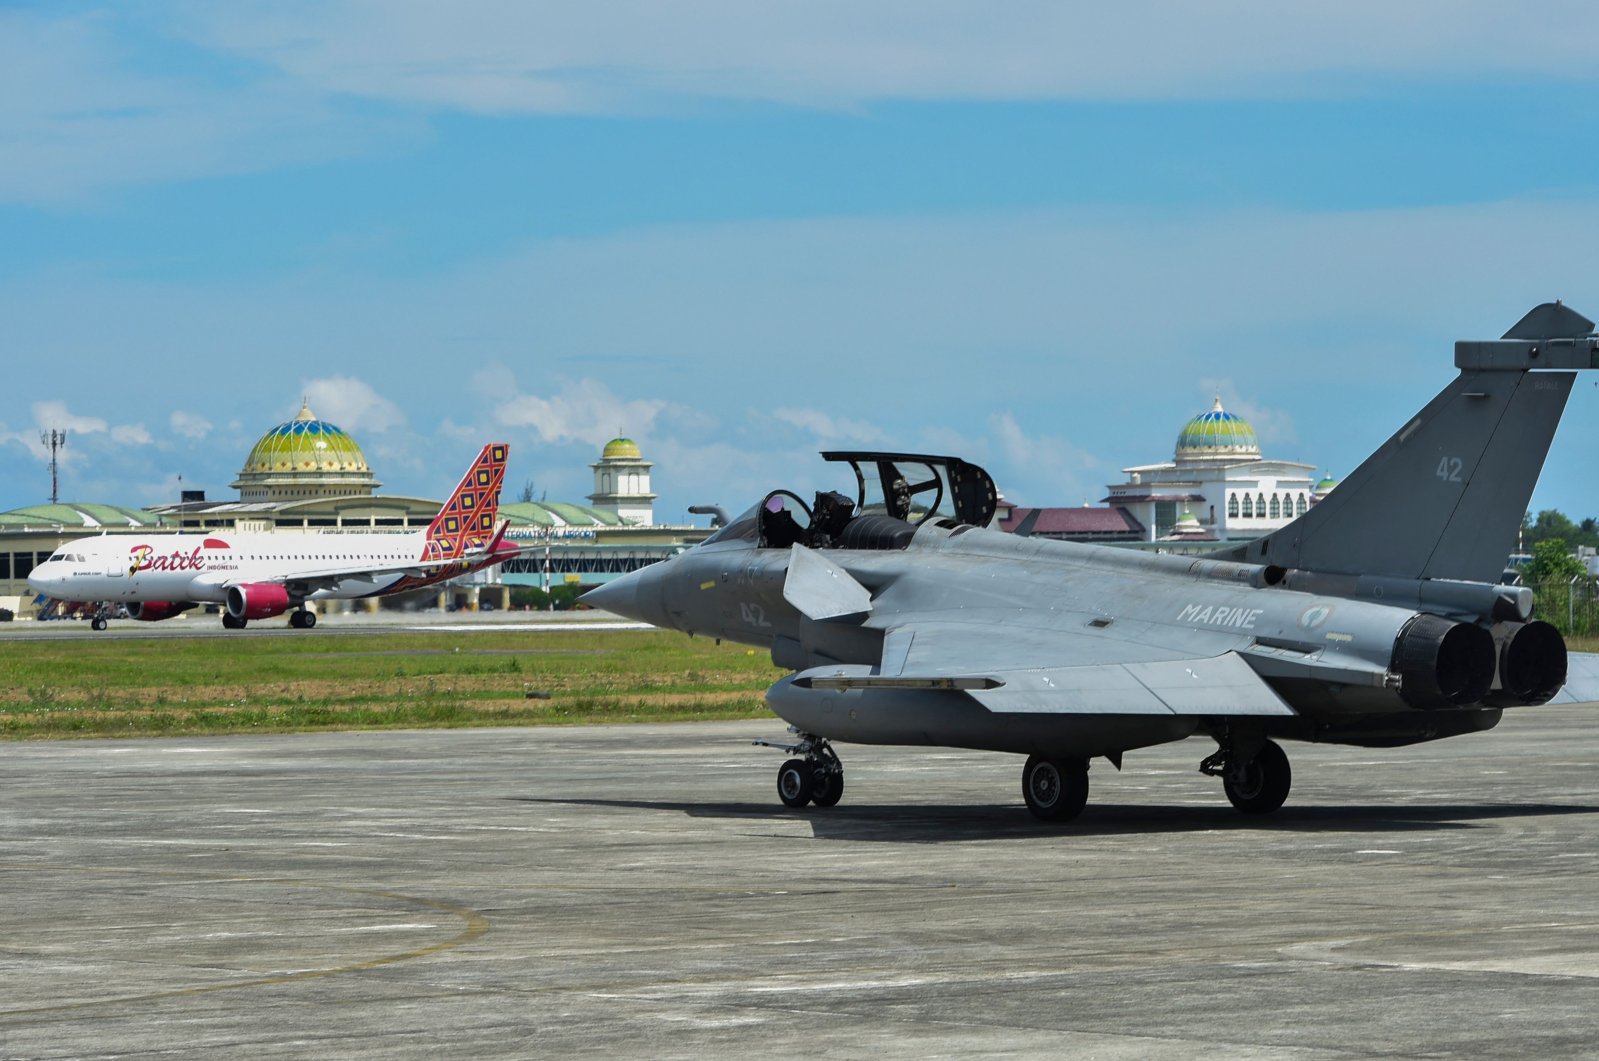 A French Rafale fighter jet is seen at an air force base in Blang Bintang, Aceh province, Indonesia, May 19, 2019. (Photo via AFP)